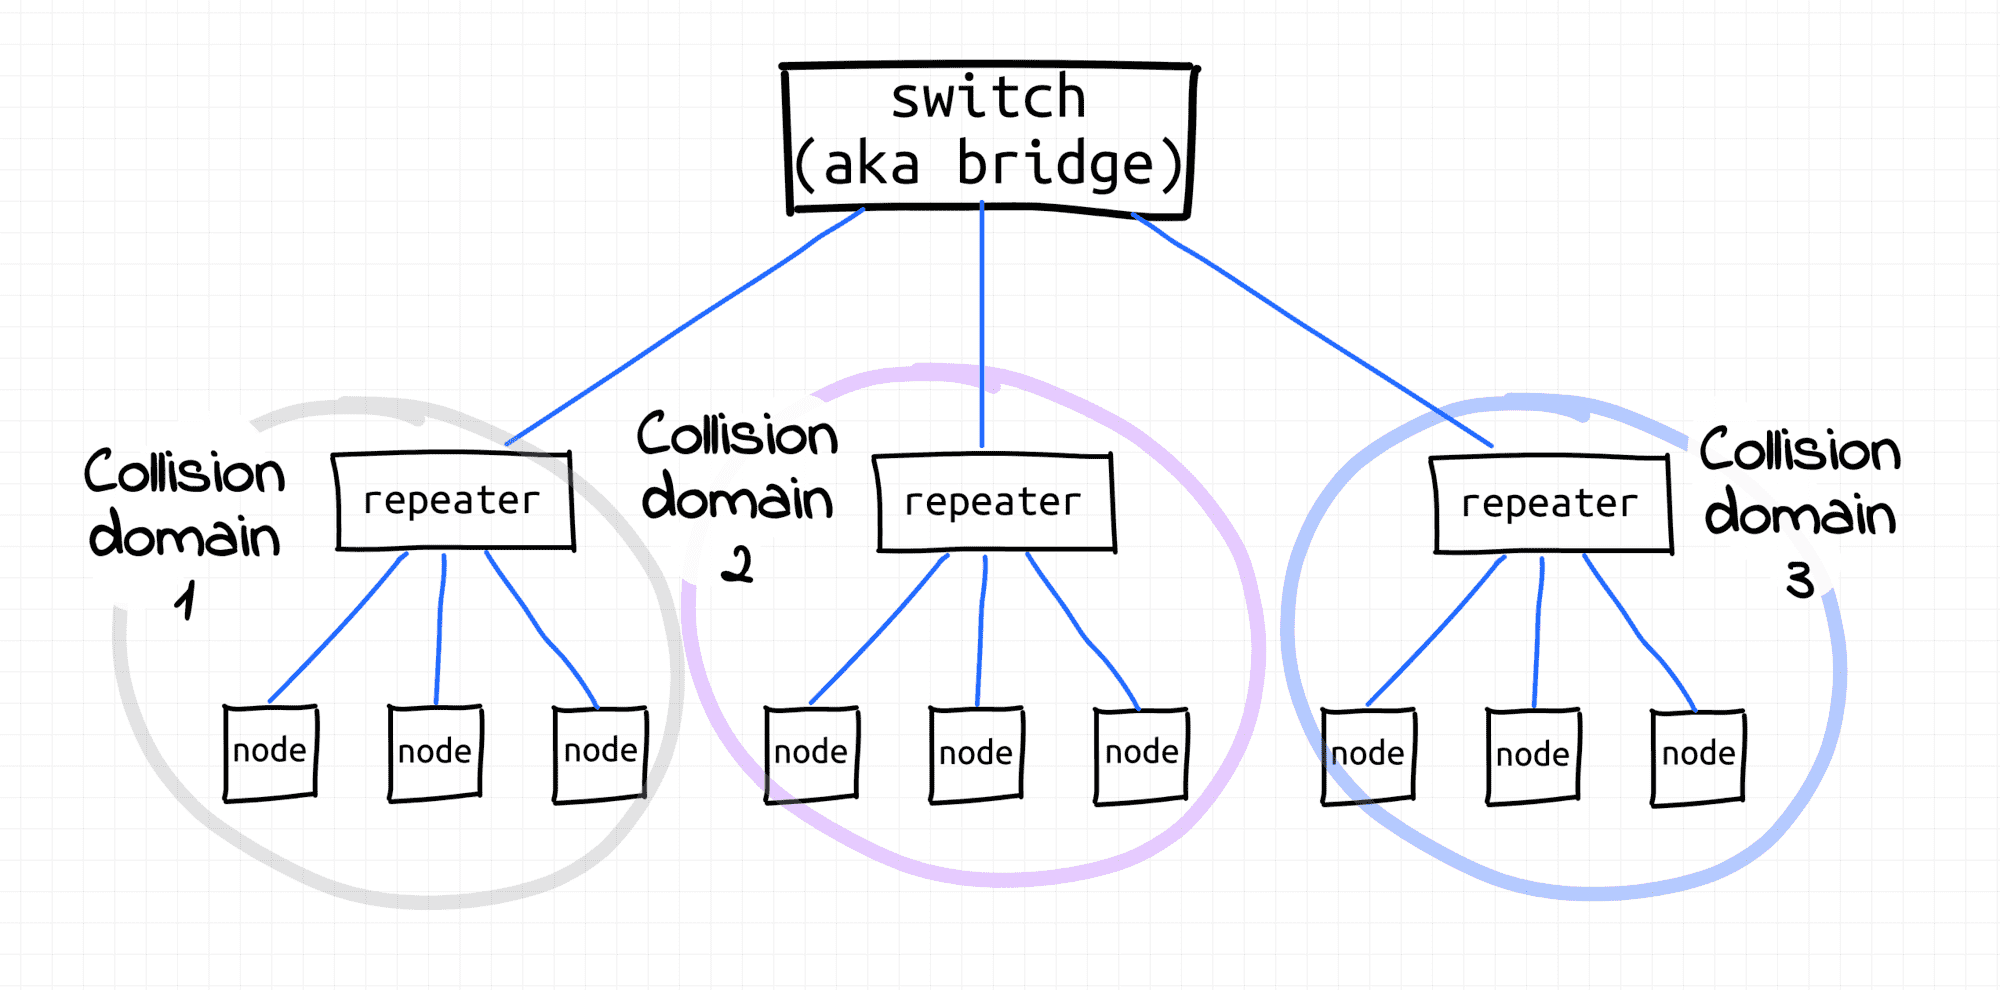 Three collision domains separated by a bridge